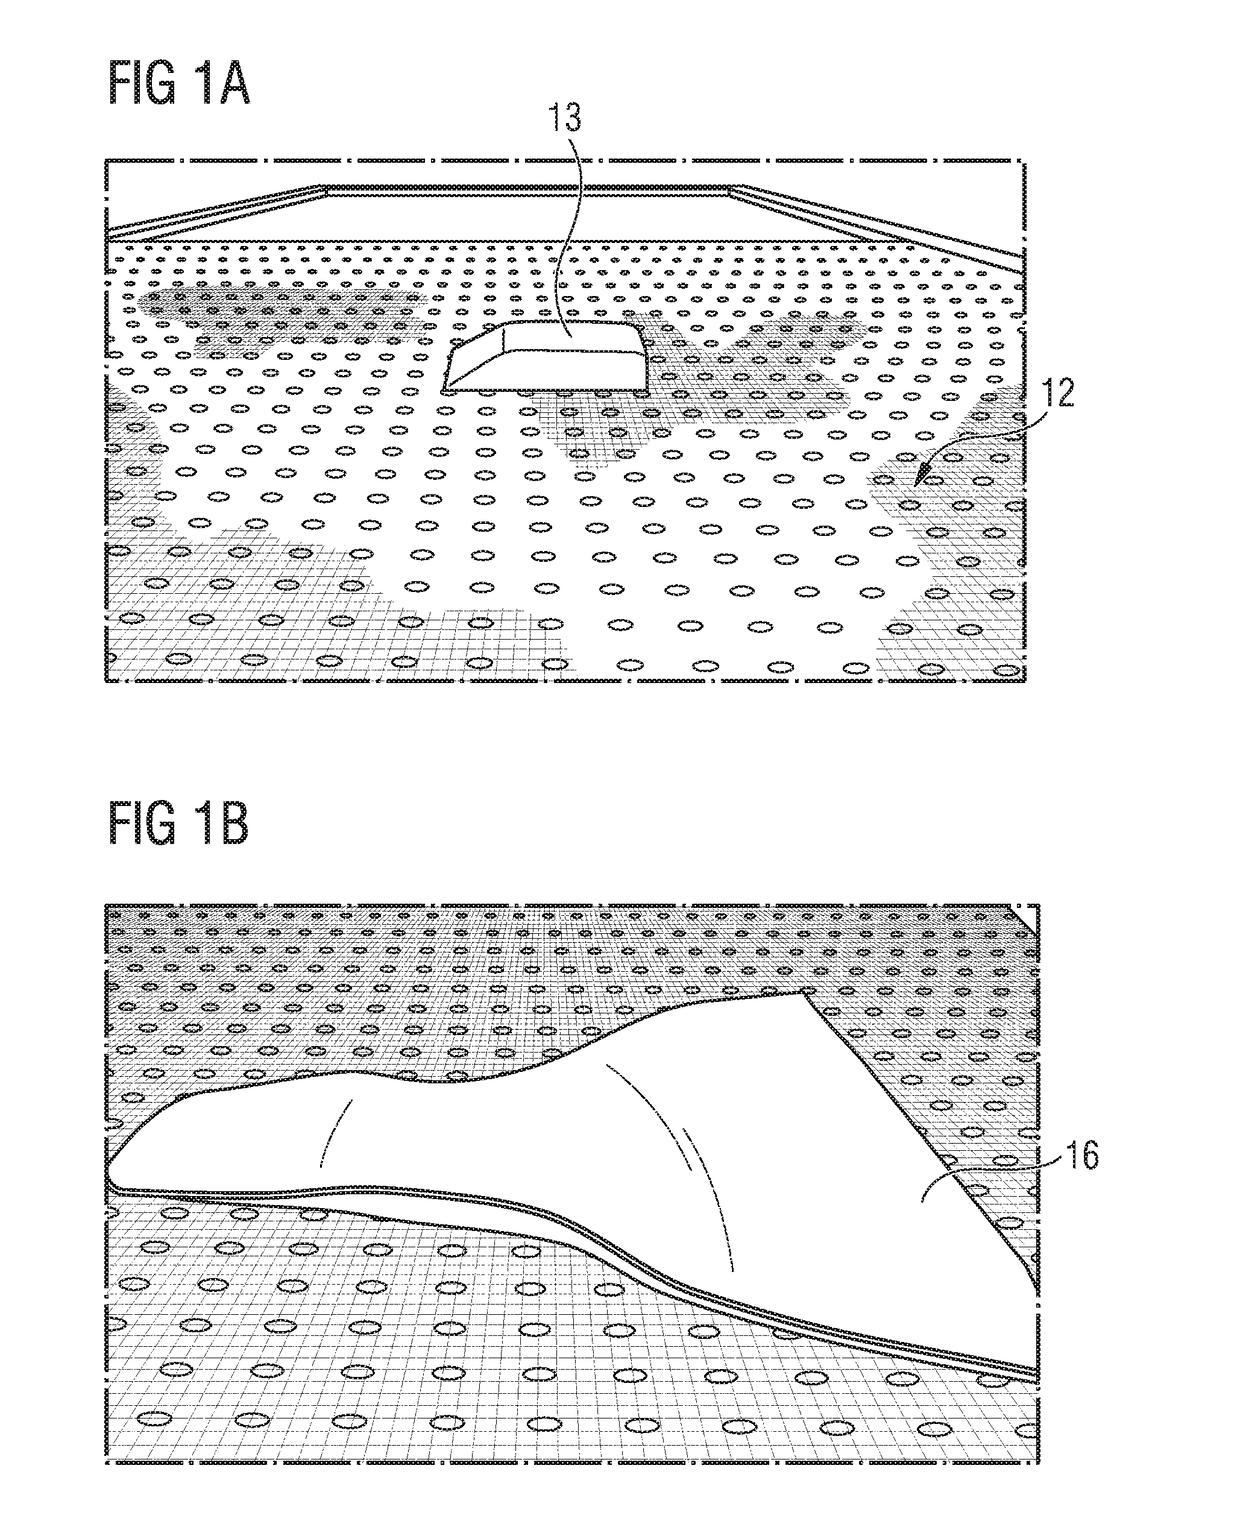 Manufacturing method for coating a fabric with a three-dimensional shape